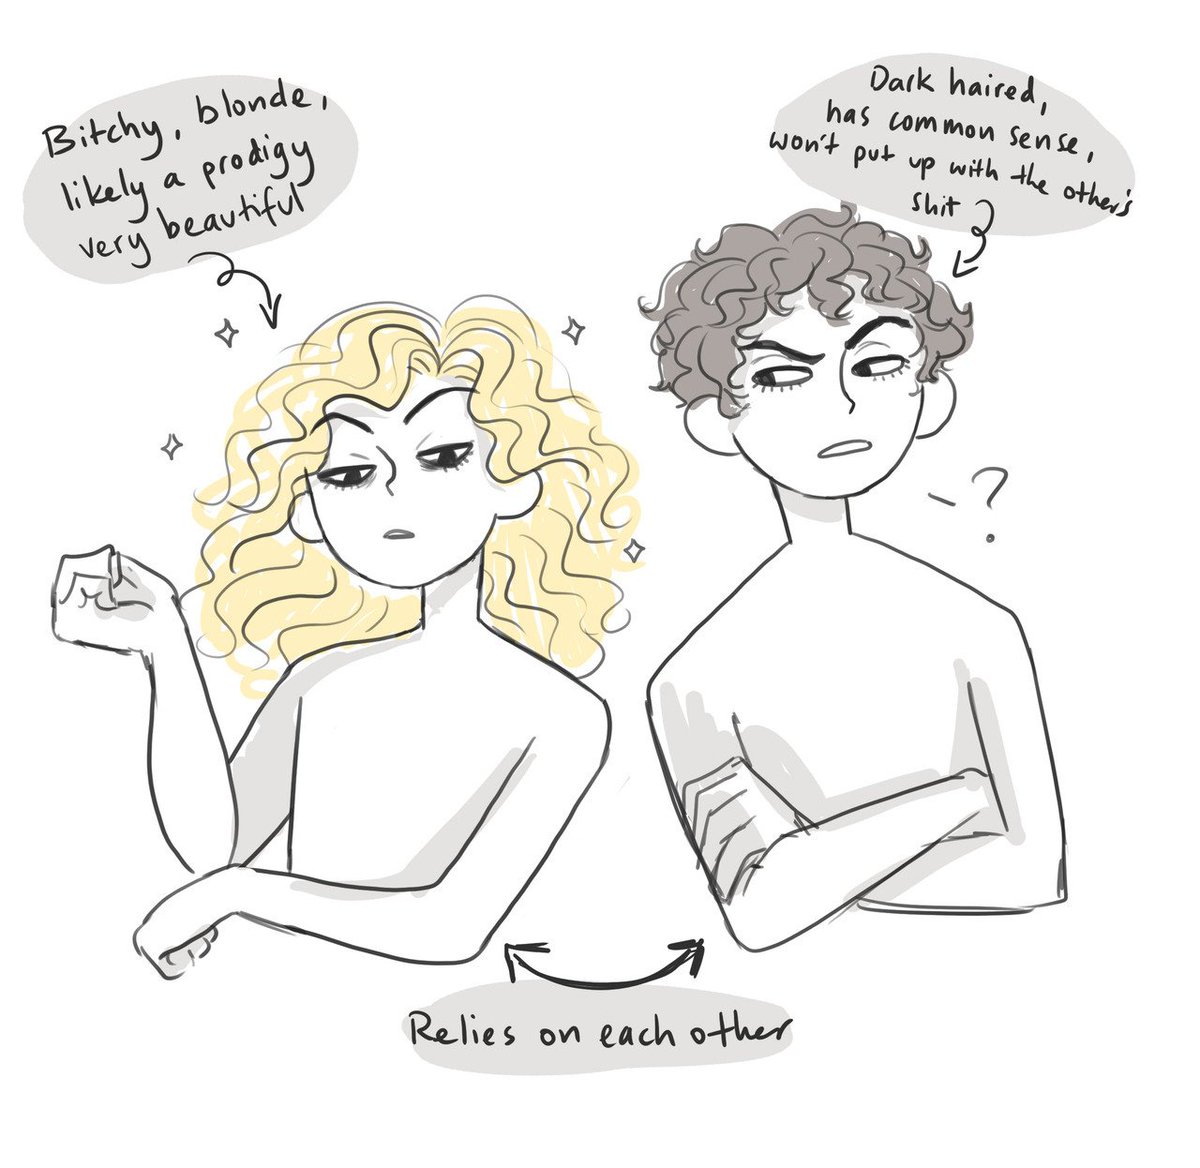 This ship dynamic is very specific to my tastes and is one of my favourites 